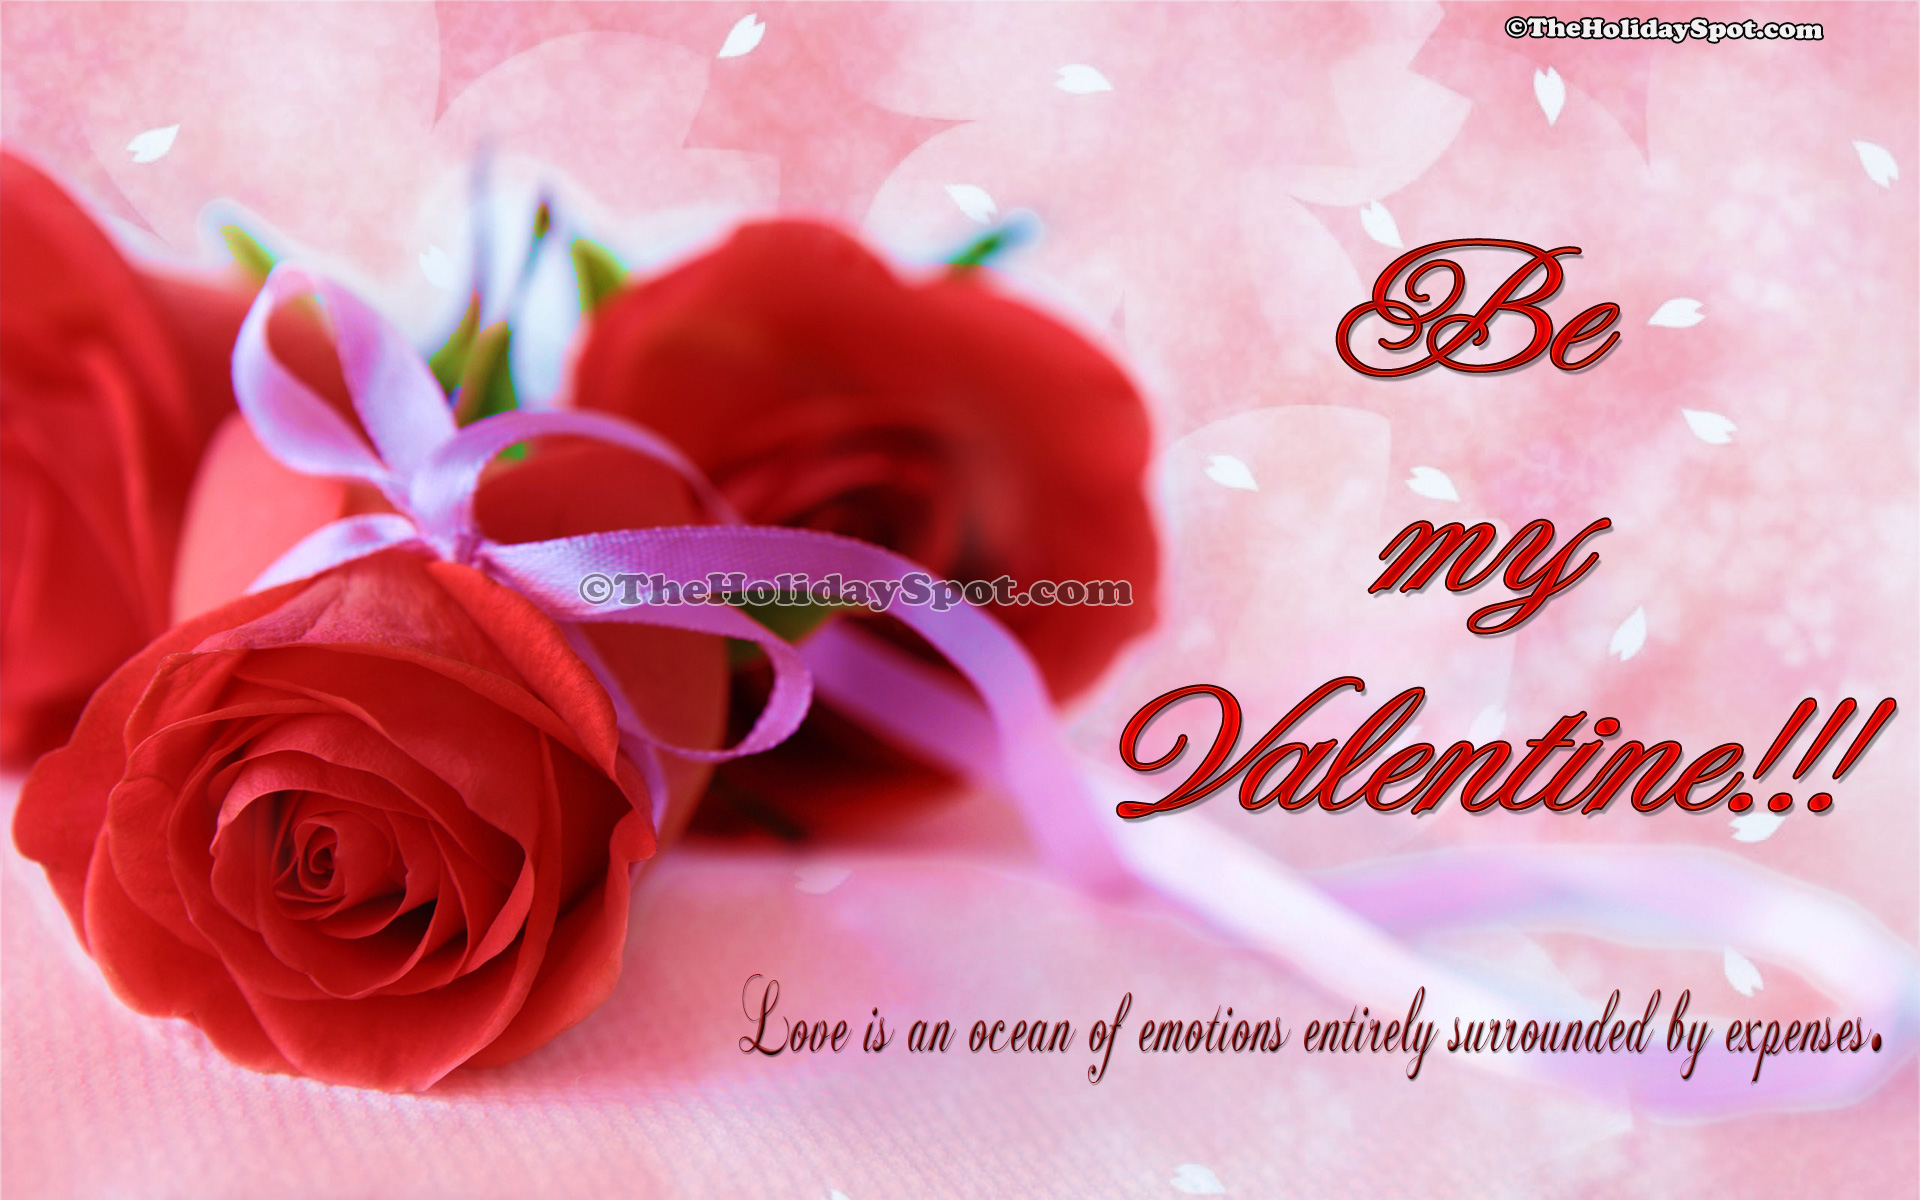 New Beautiful Happy Valentines Day HD Wallpaper Image